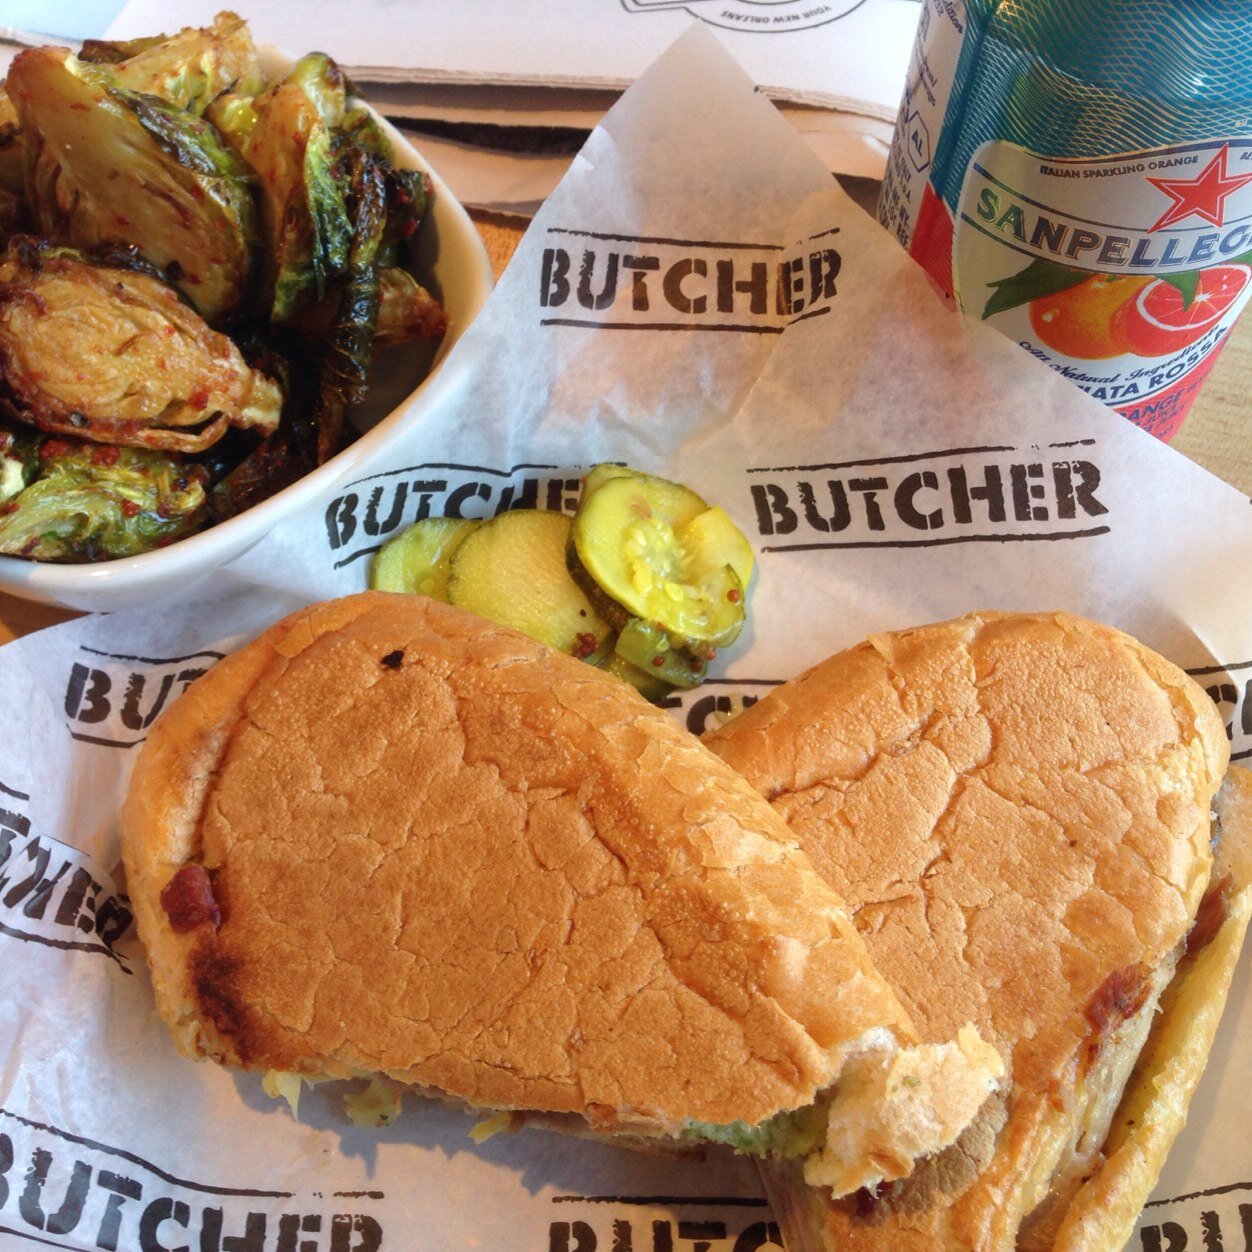 Making leftovers jealous since 2009. Share yours with #lunchbrag or lunchbrag@gmail.com